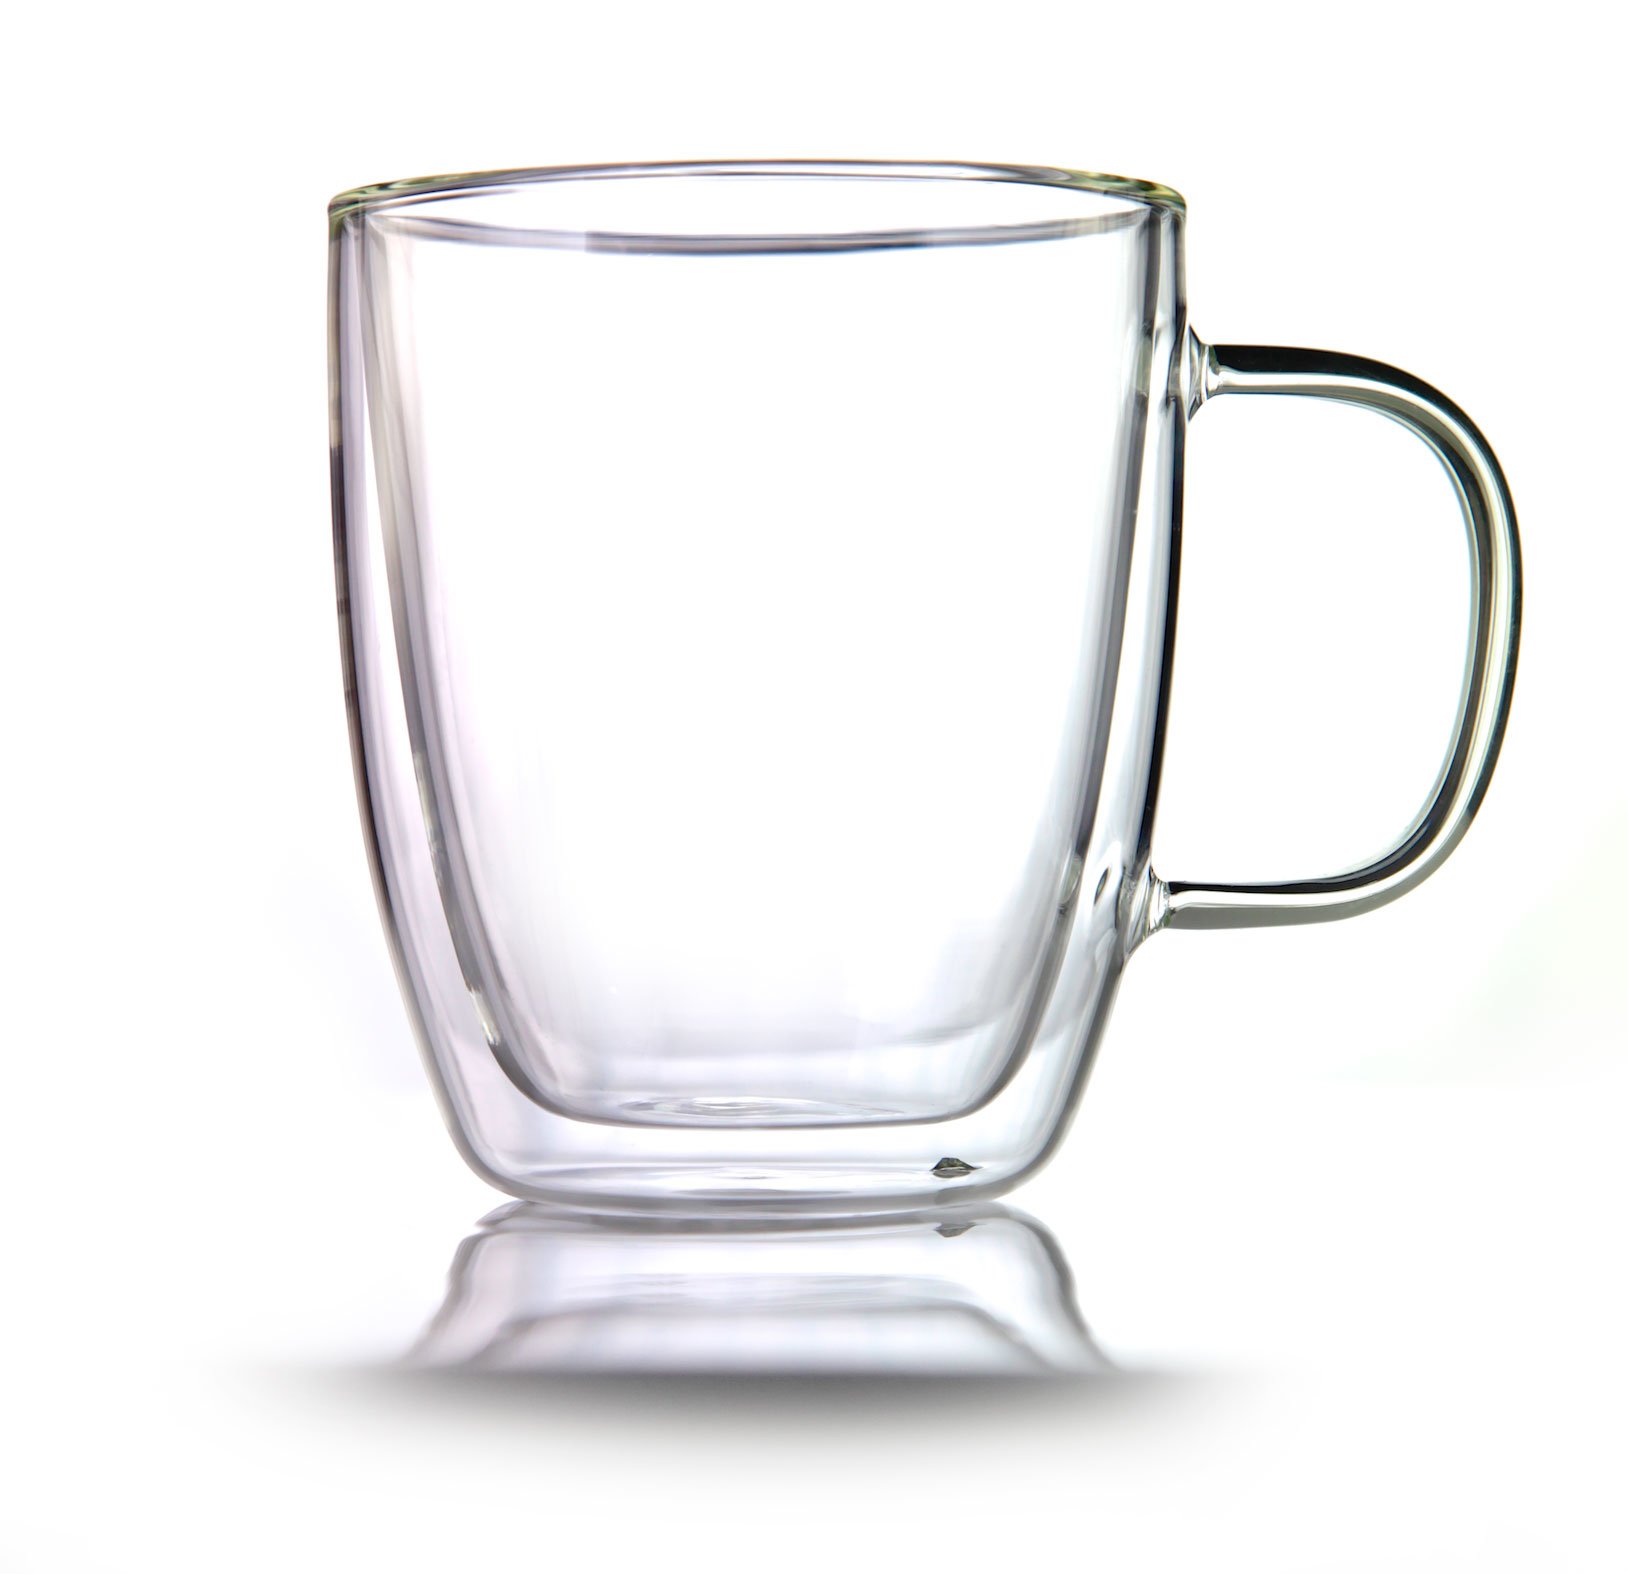 Double-walled-cup-350-ml_MG_8235